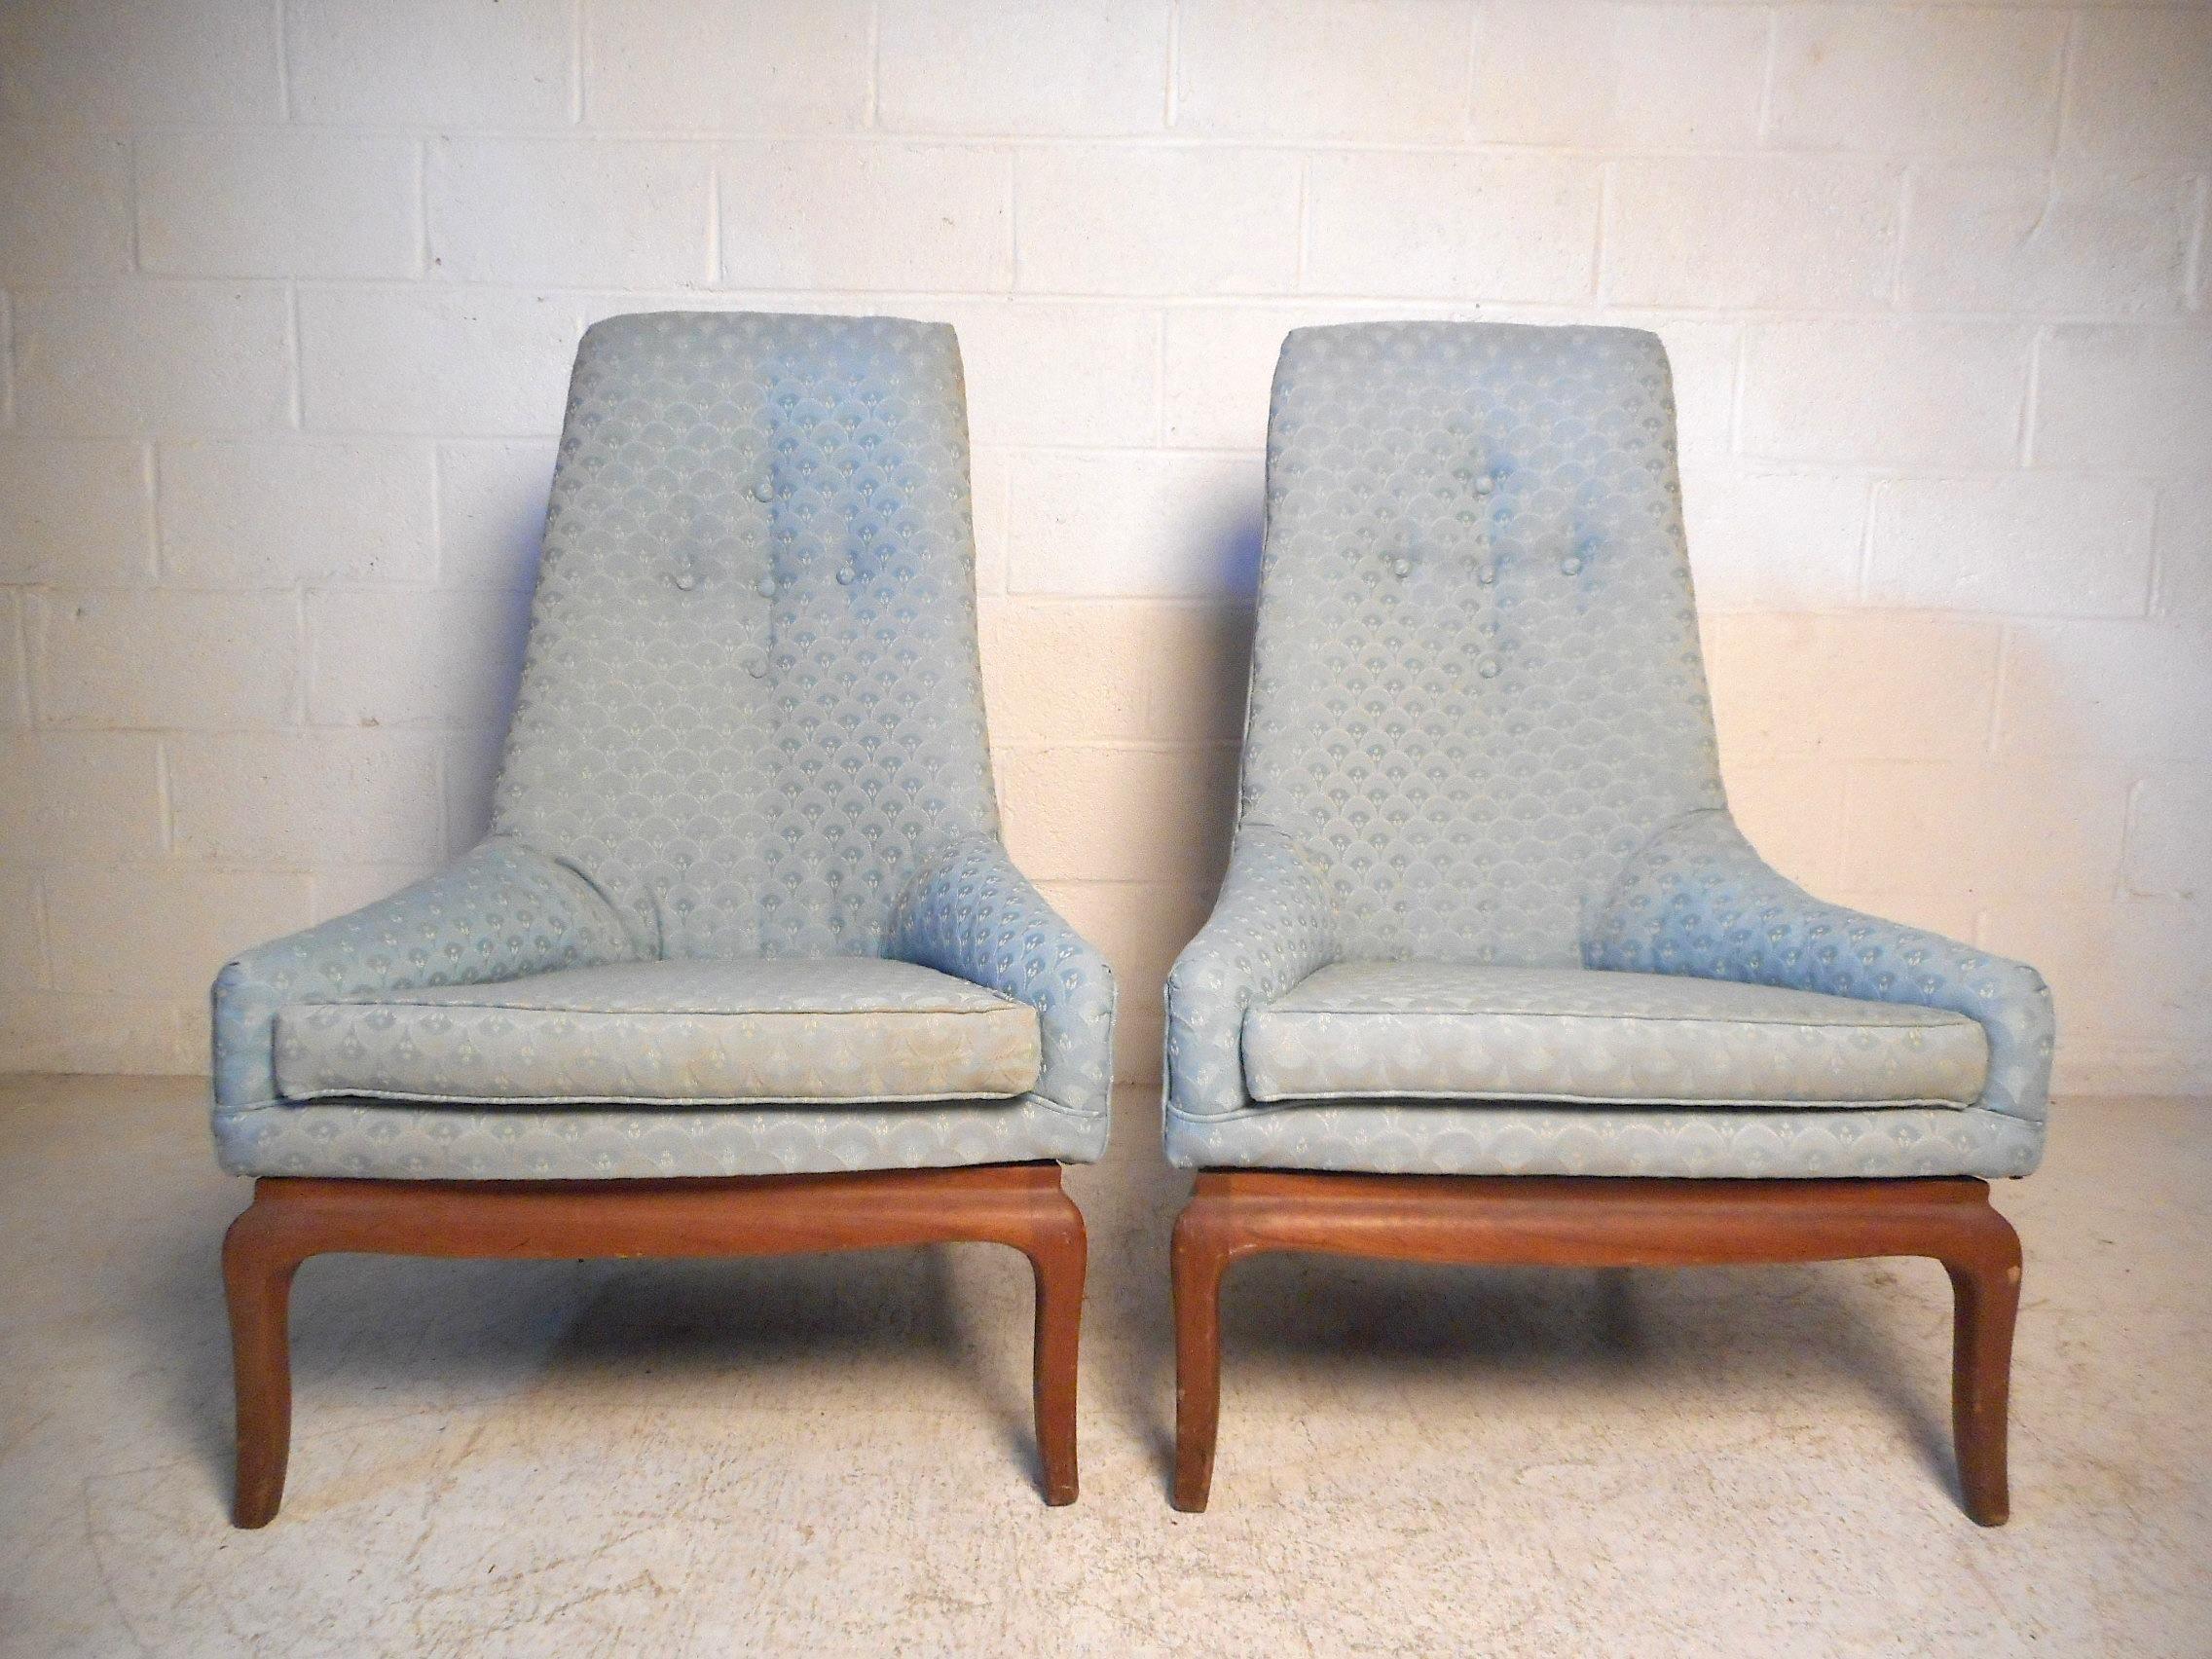 This stylish pair of midcentury chairs feature high tapered backrests with tufted upholstery, sturdy wooden bases with splayed back legs, and a vintage sky blue upholstery. Styled after Adrian Pearsall, these chairs will make an impression in any